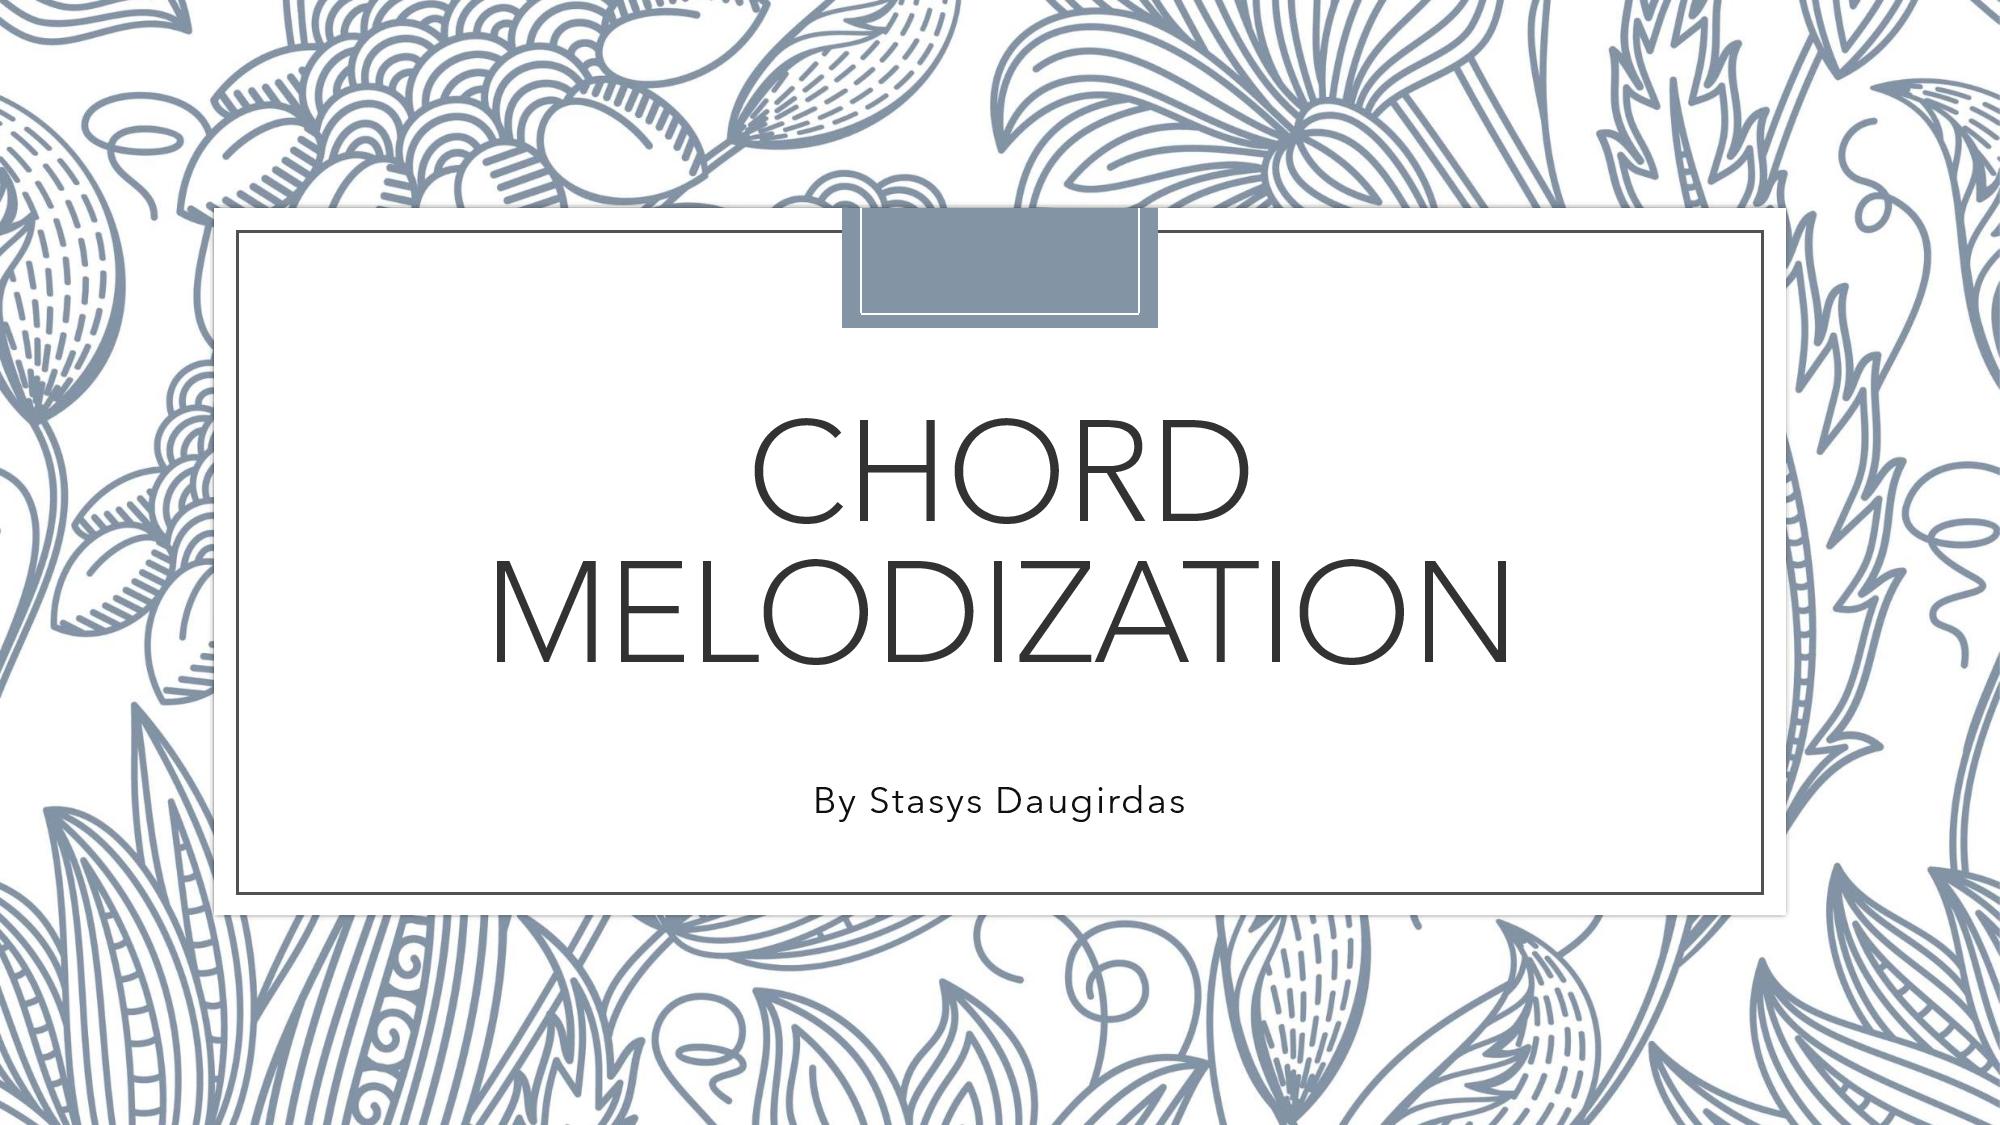 chord melodization cover page 001 3